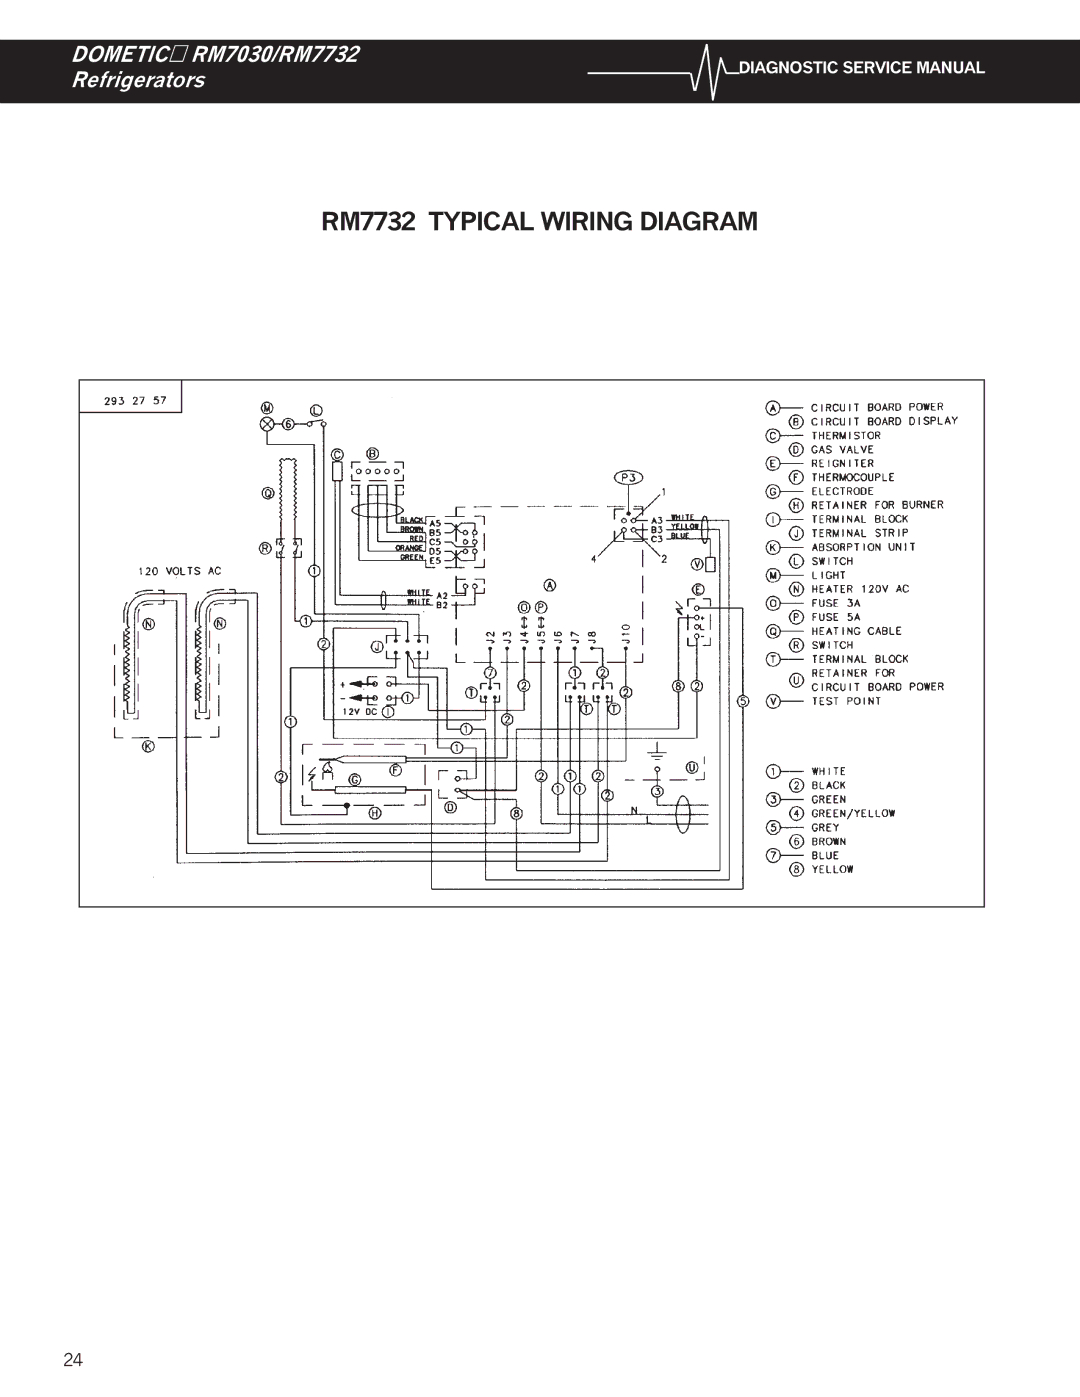 Dometic RM7030 service manual RM7732 Typical Wiring Diagram 